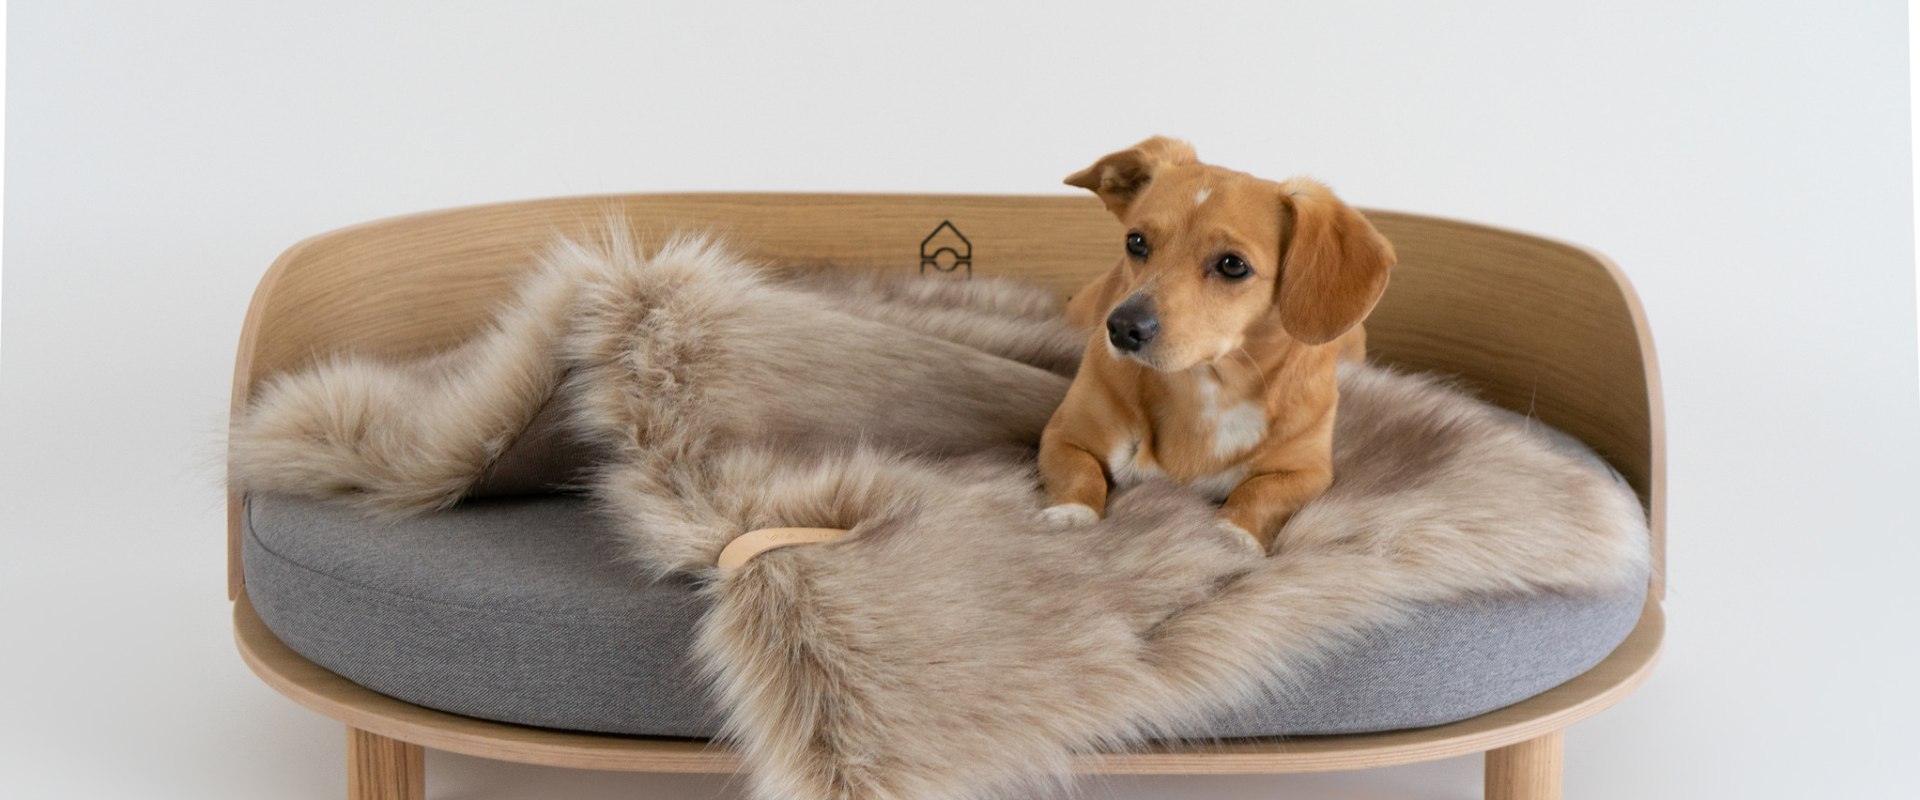 The Importance of Removable Covers for Dog Beds